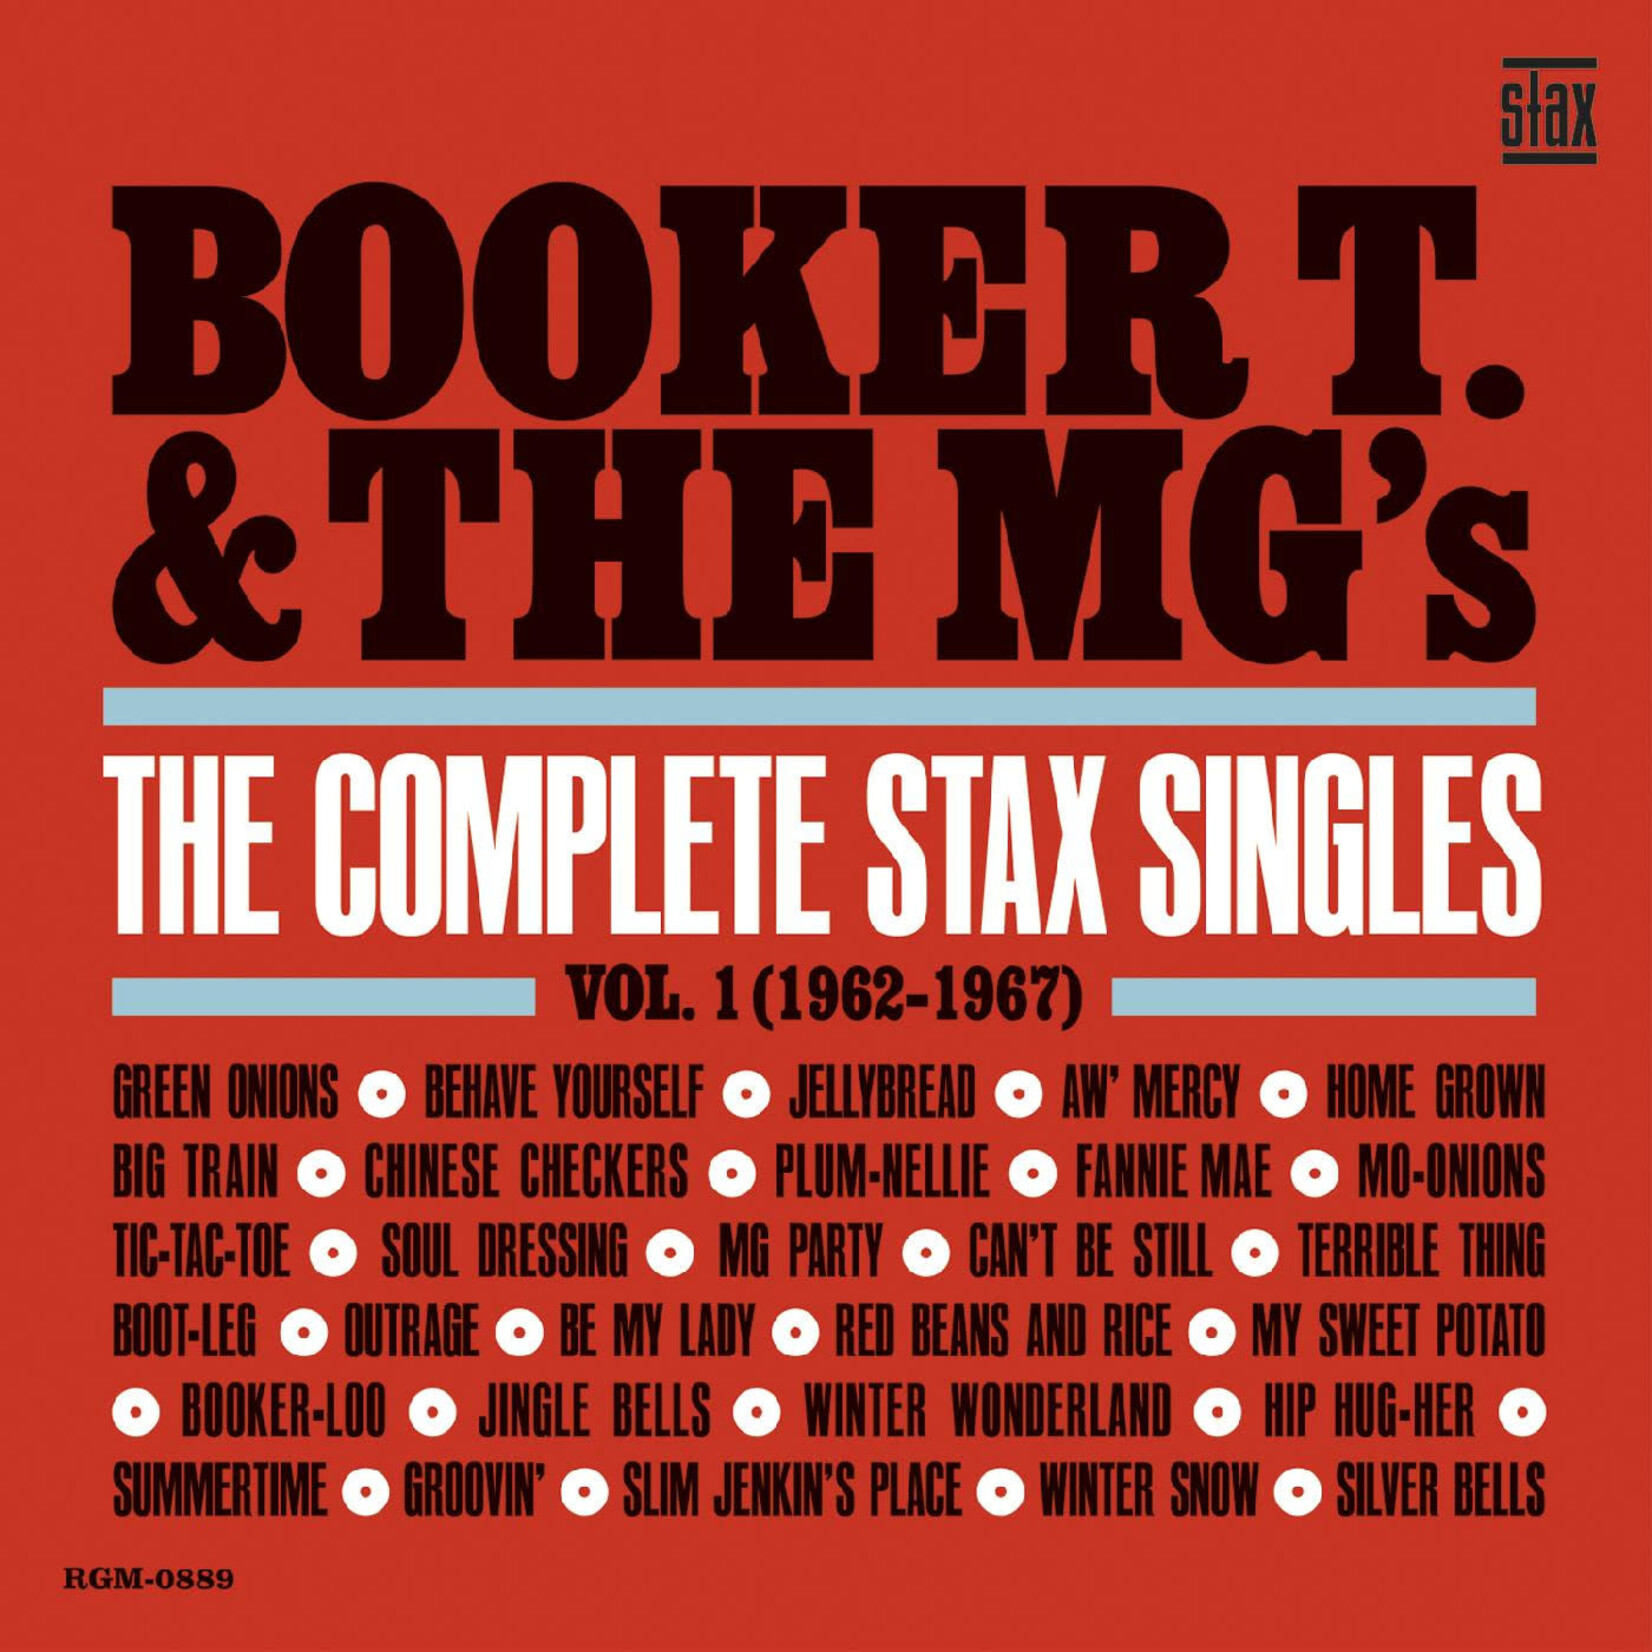 Booker T. & the MG's - The Complete Stax Singles Vol. 1 (1962-1967) (2-LP, Red Vinyl)